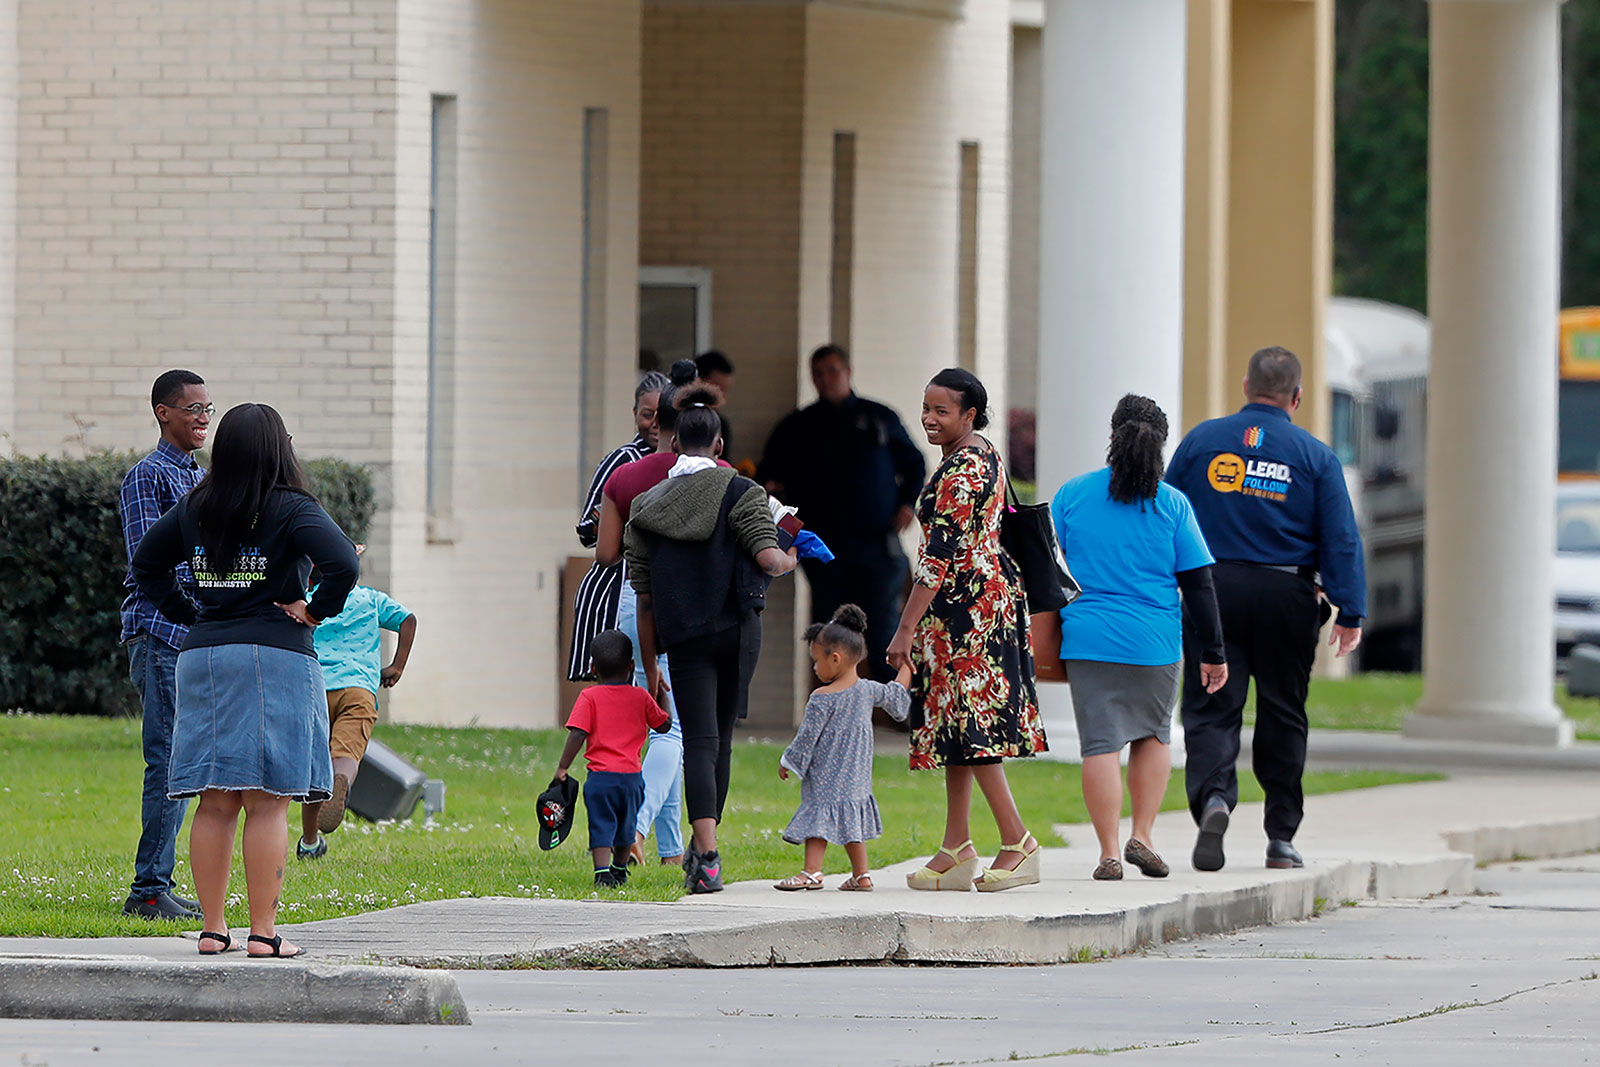 People arrive for church services at the Life Tabernacle Church on Sunday, March 29.